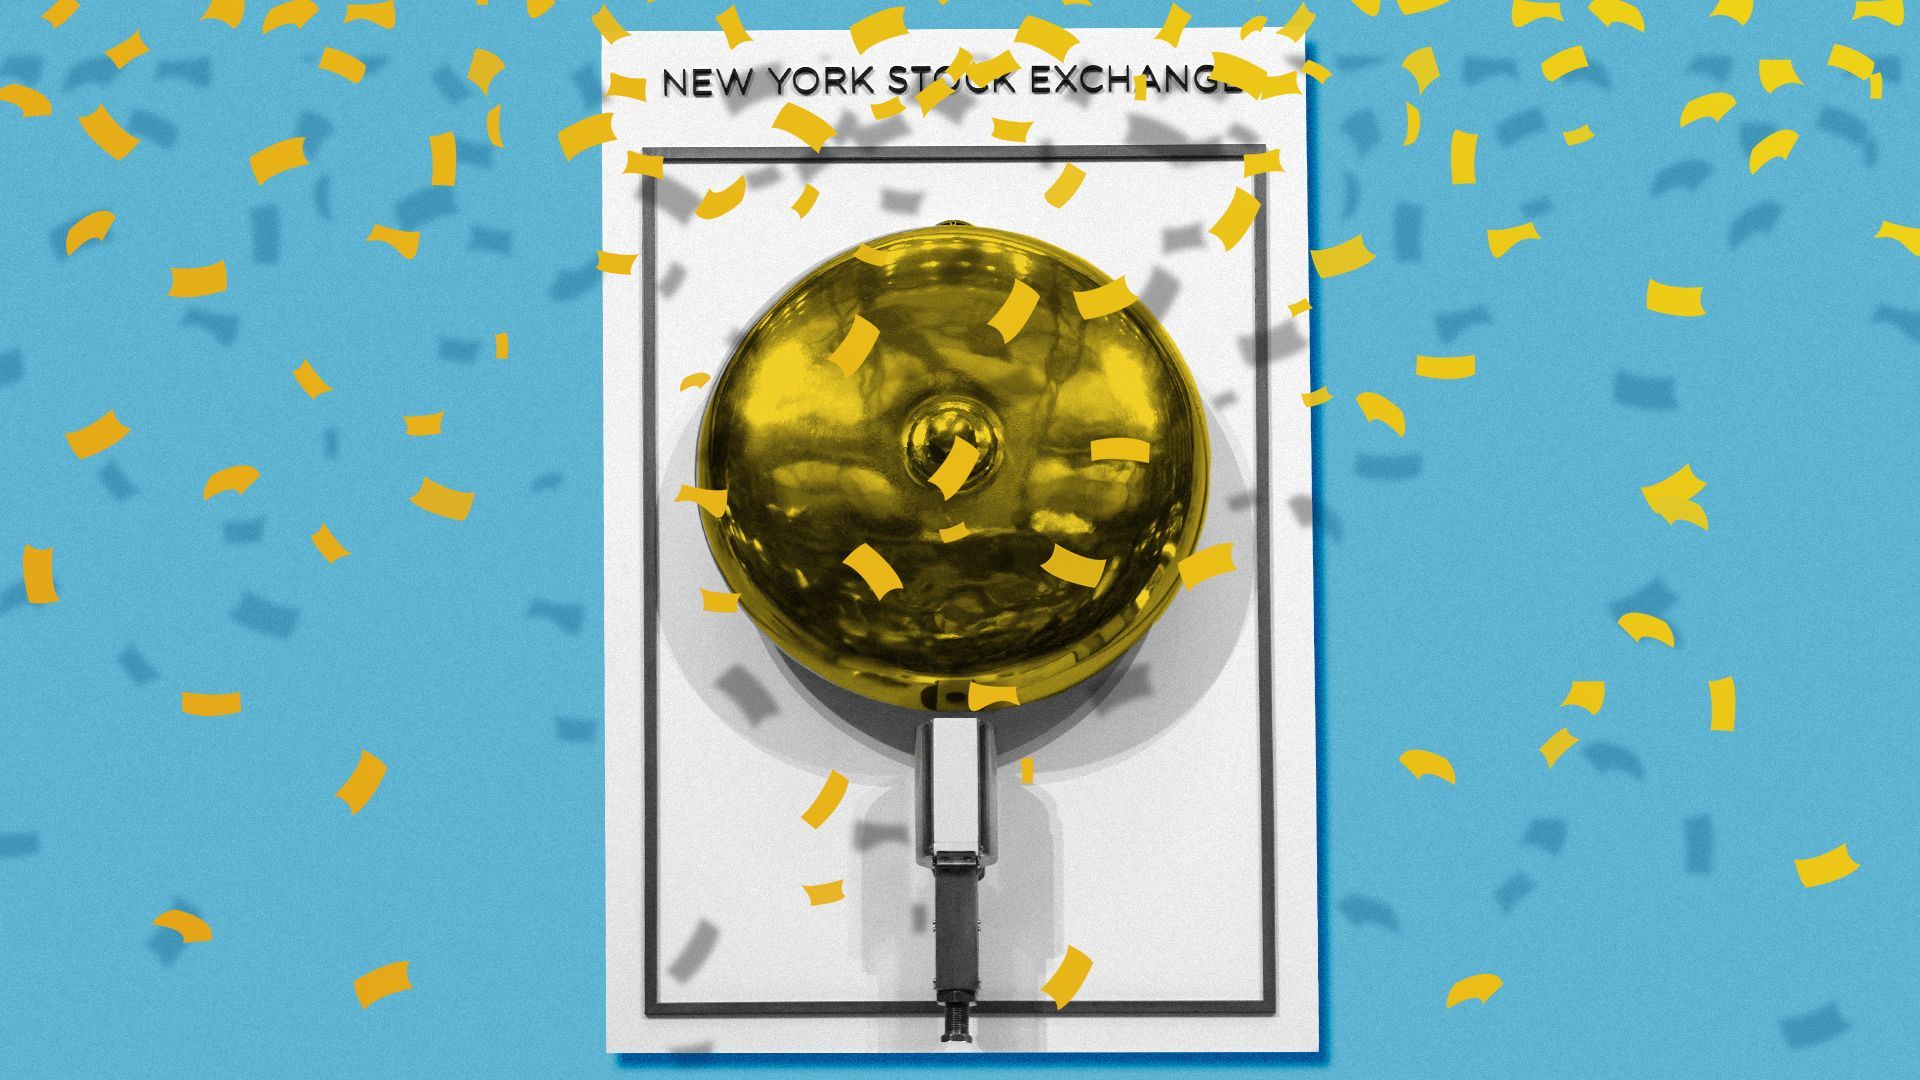 Illustration of confetti falling in front of the New York Stock Exchange bell.